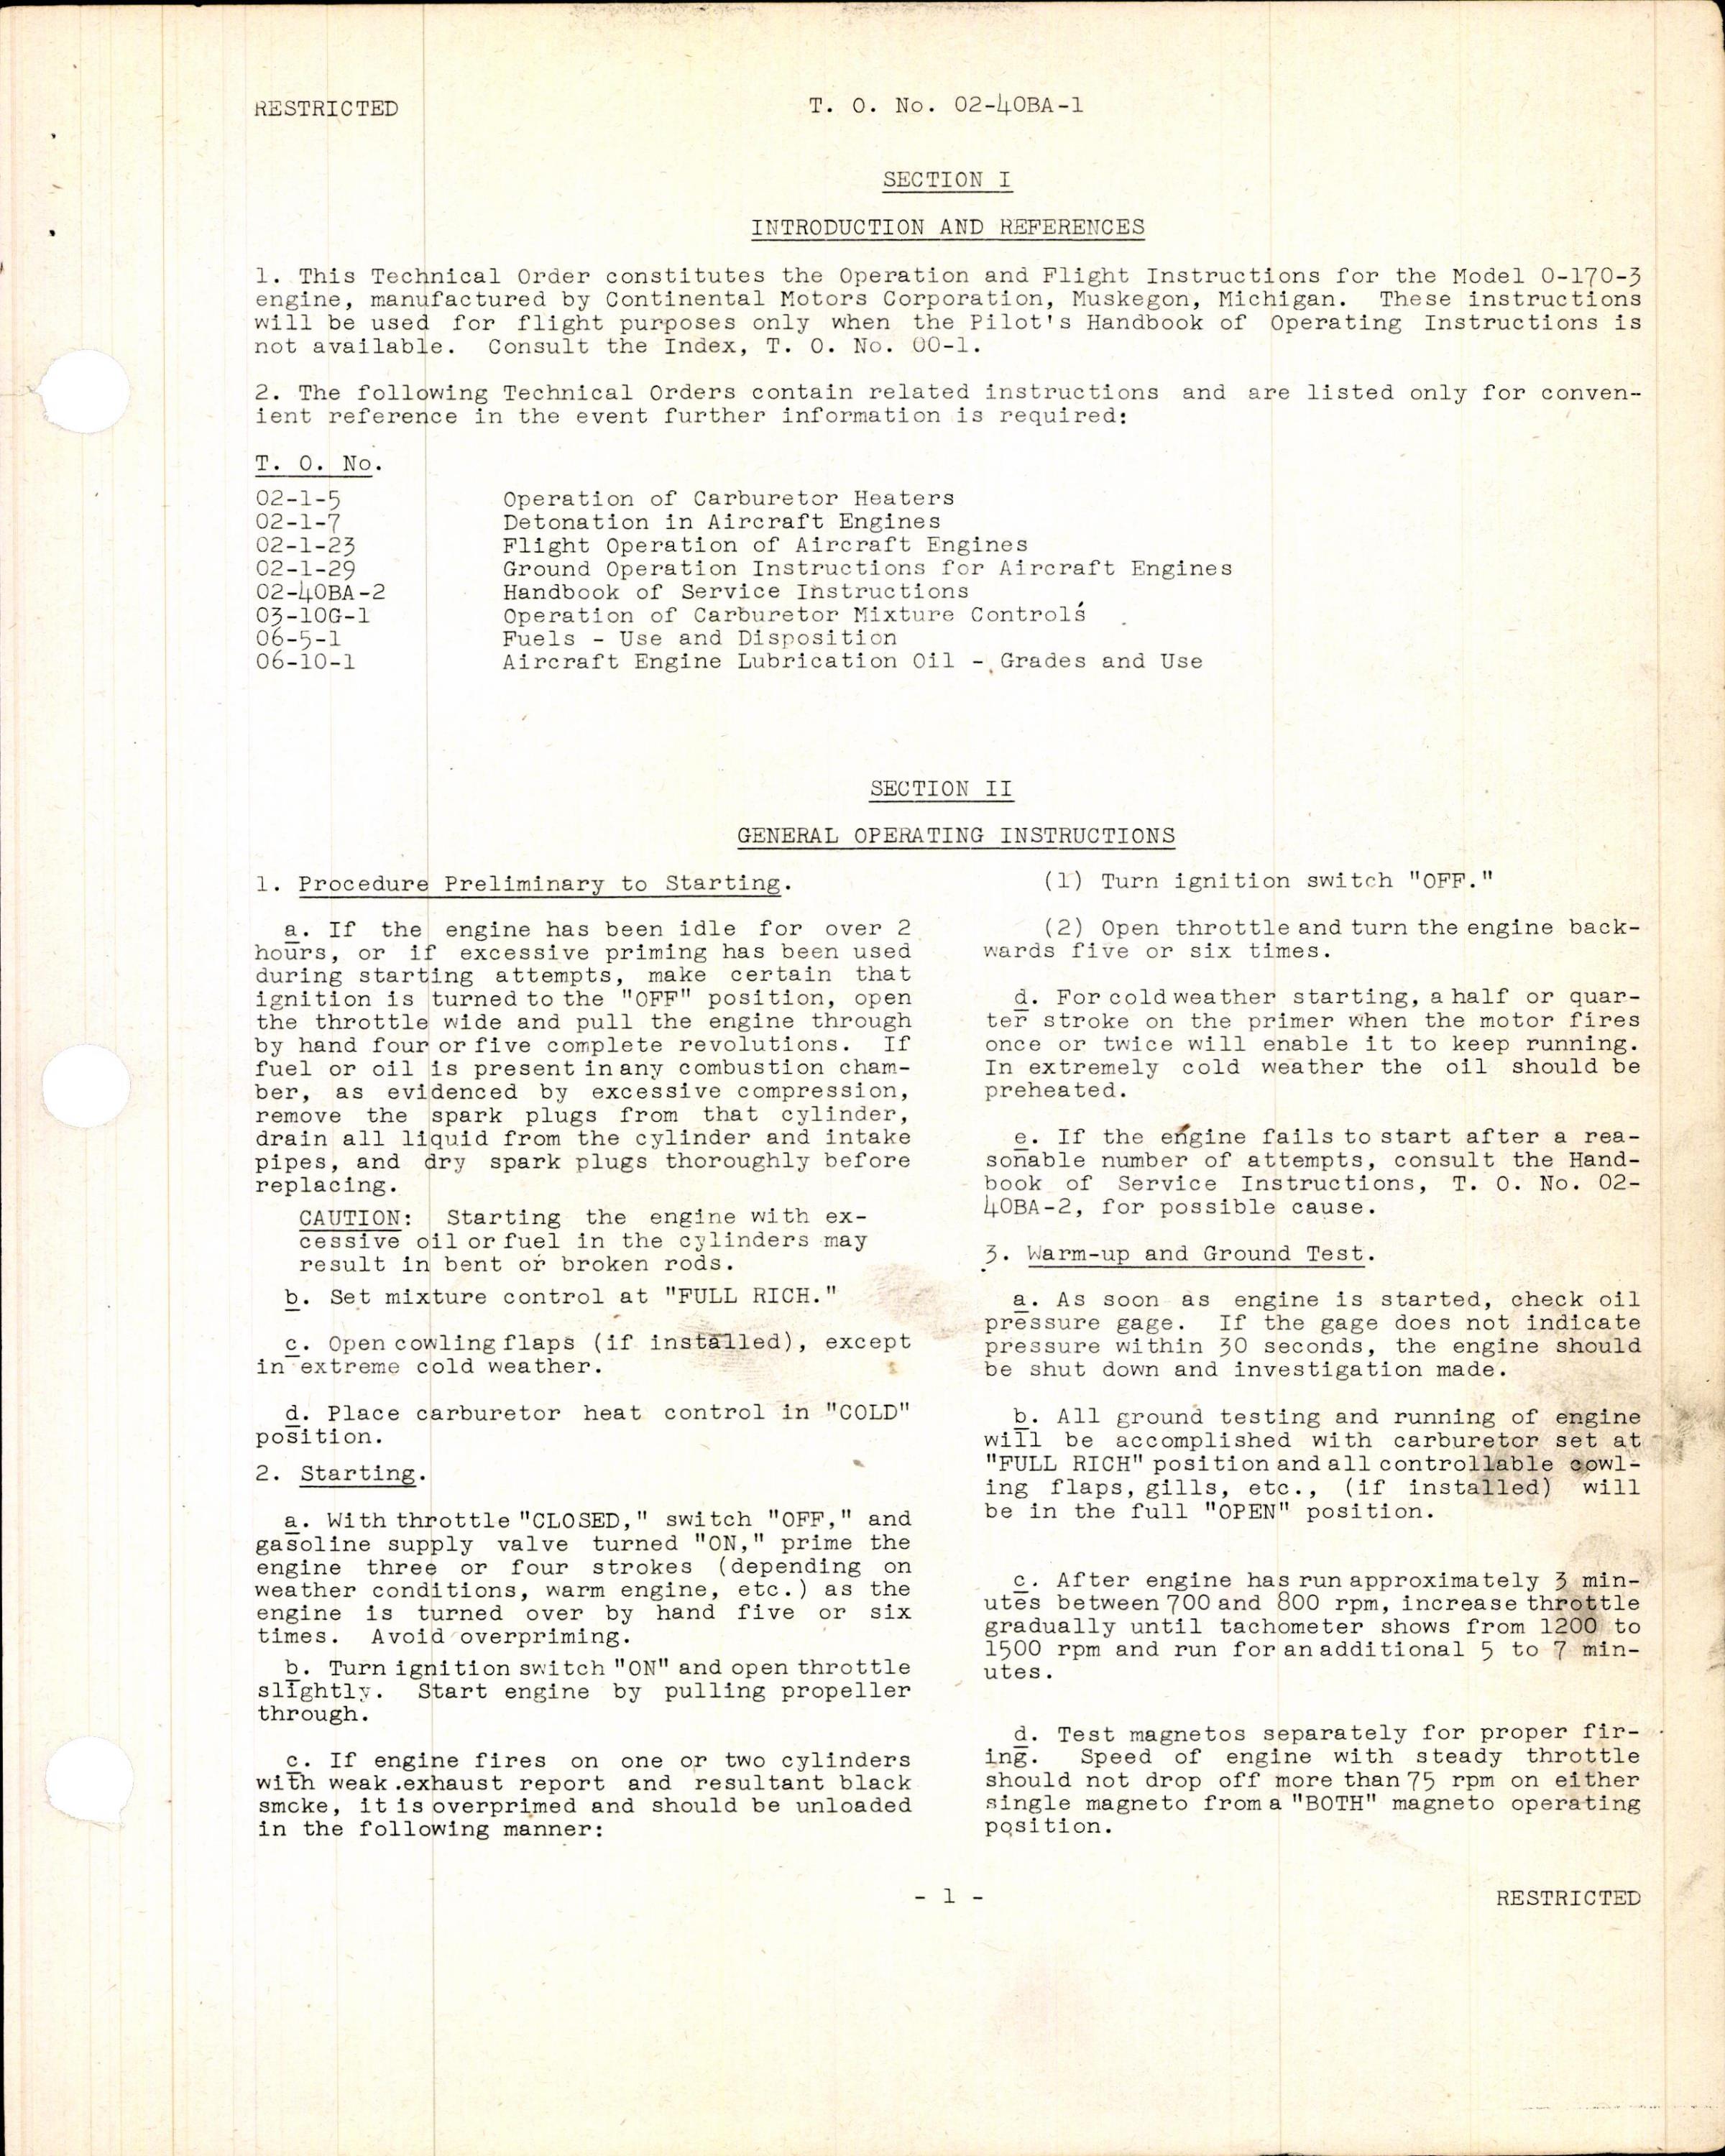 Sample page 5 from AirCorps Library document: Operation Instructions for 0-170-3 Aircraft Engine